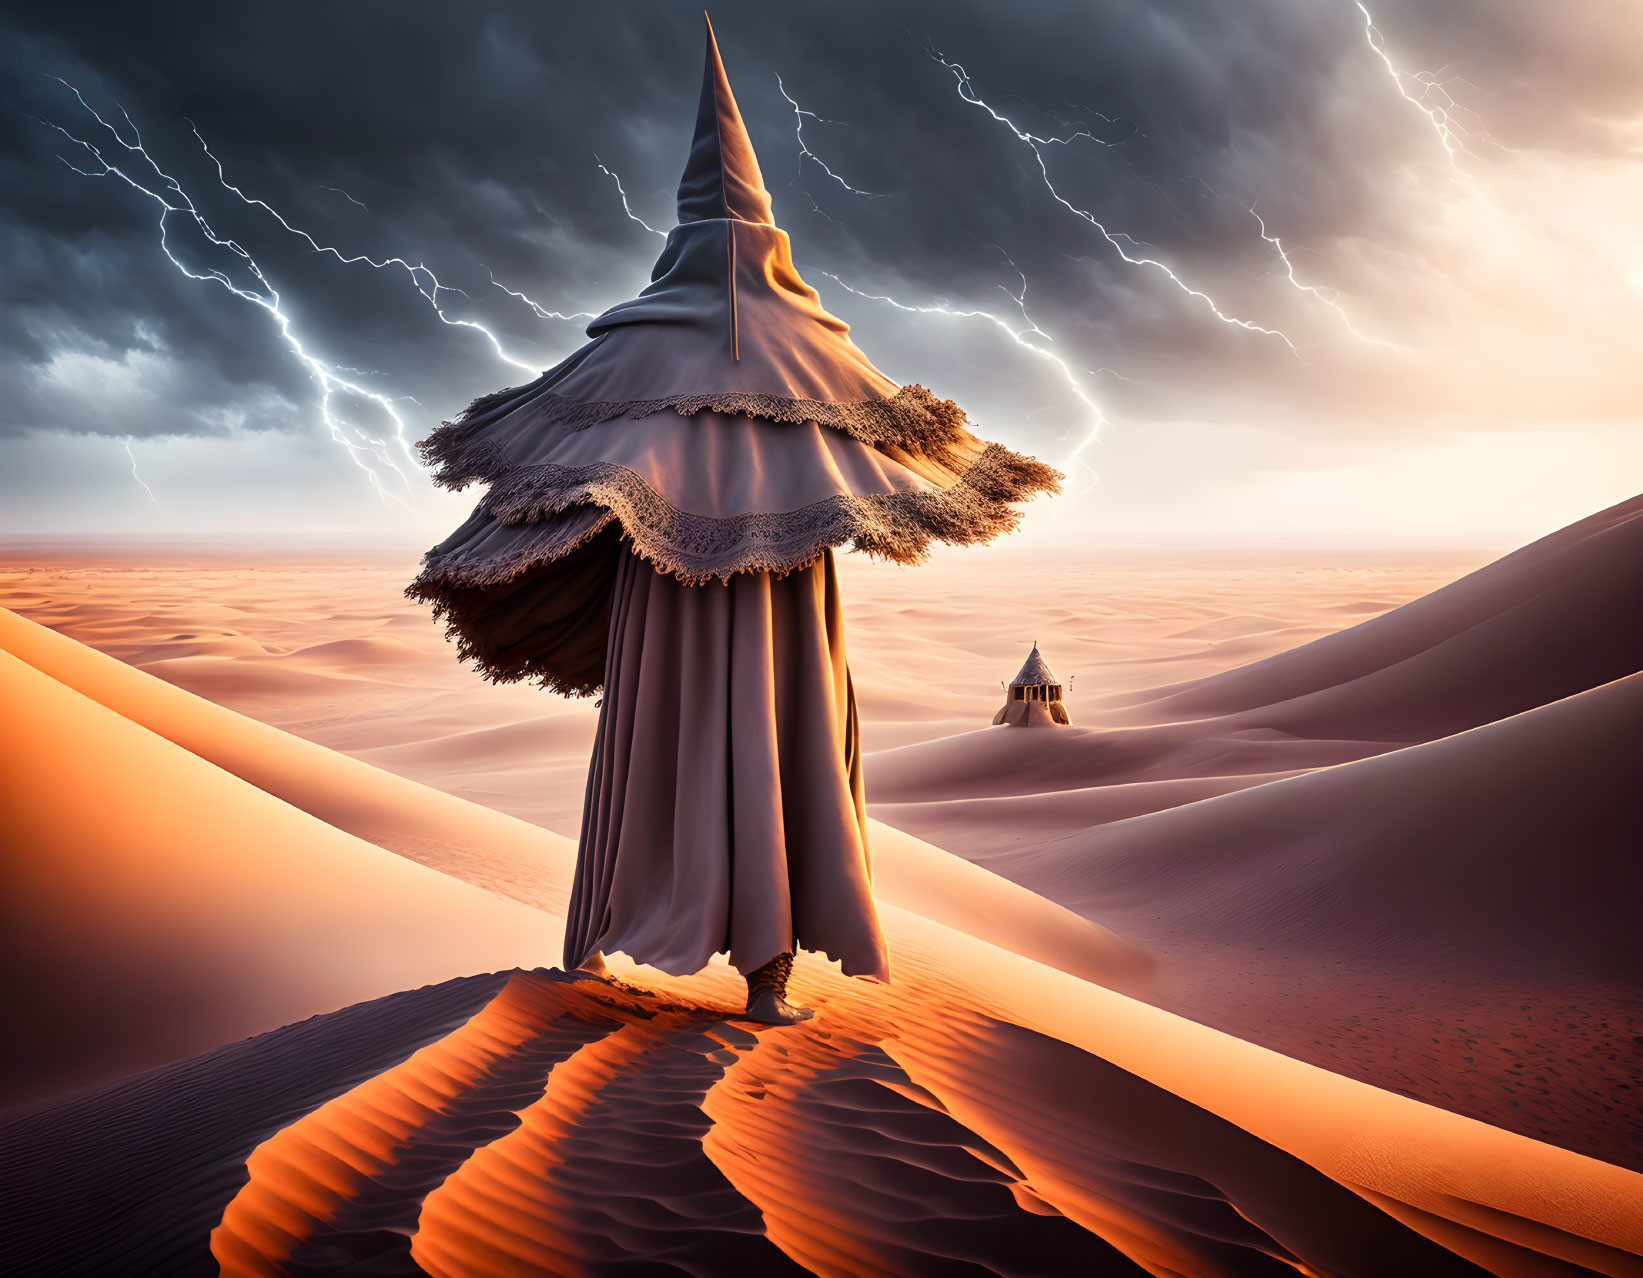 Surreal desert landscape with giant wizard hat structure and lightning.